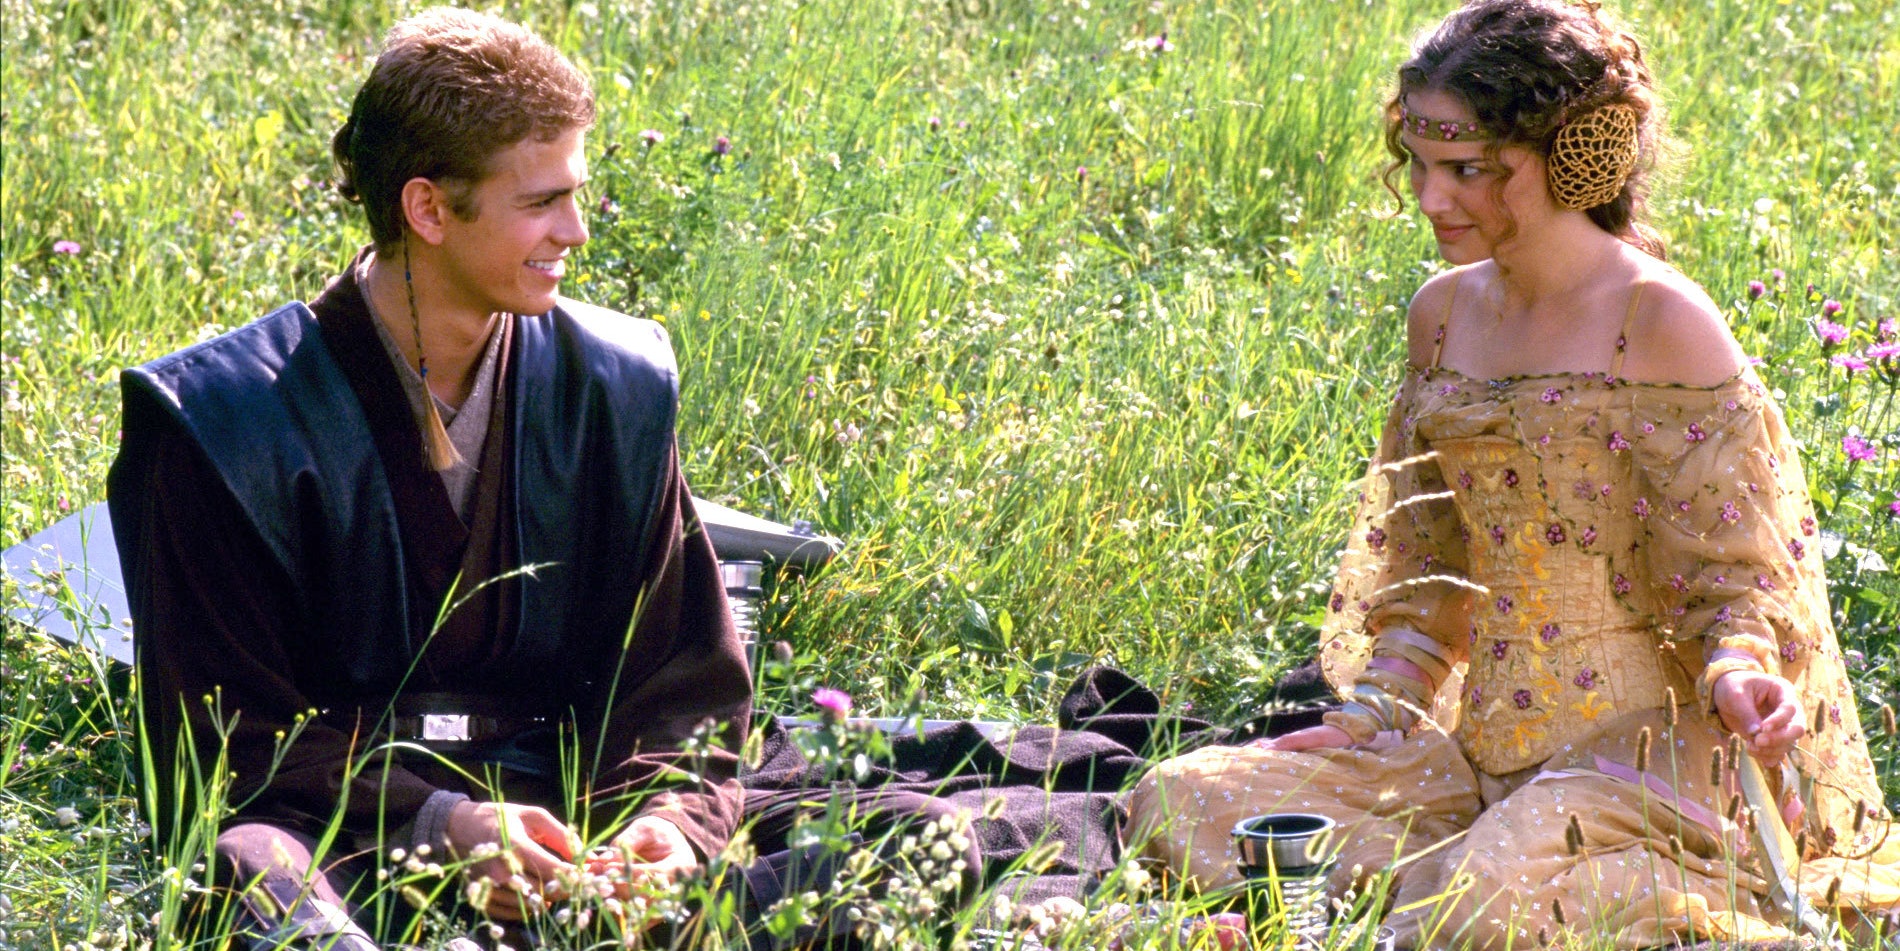 anakin-skywalker-probably-wasn-t-really-in-love-with-padm-in-star